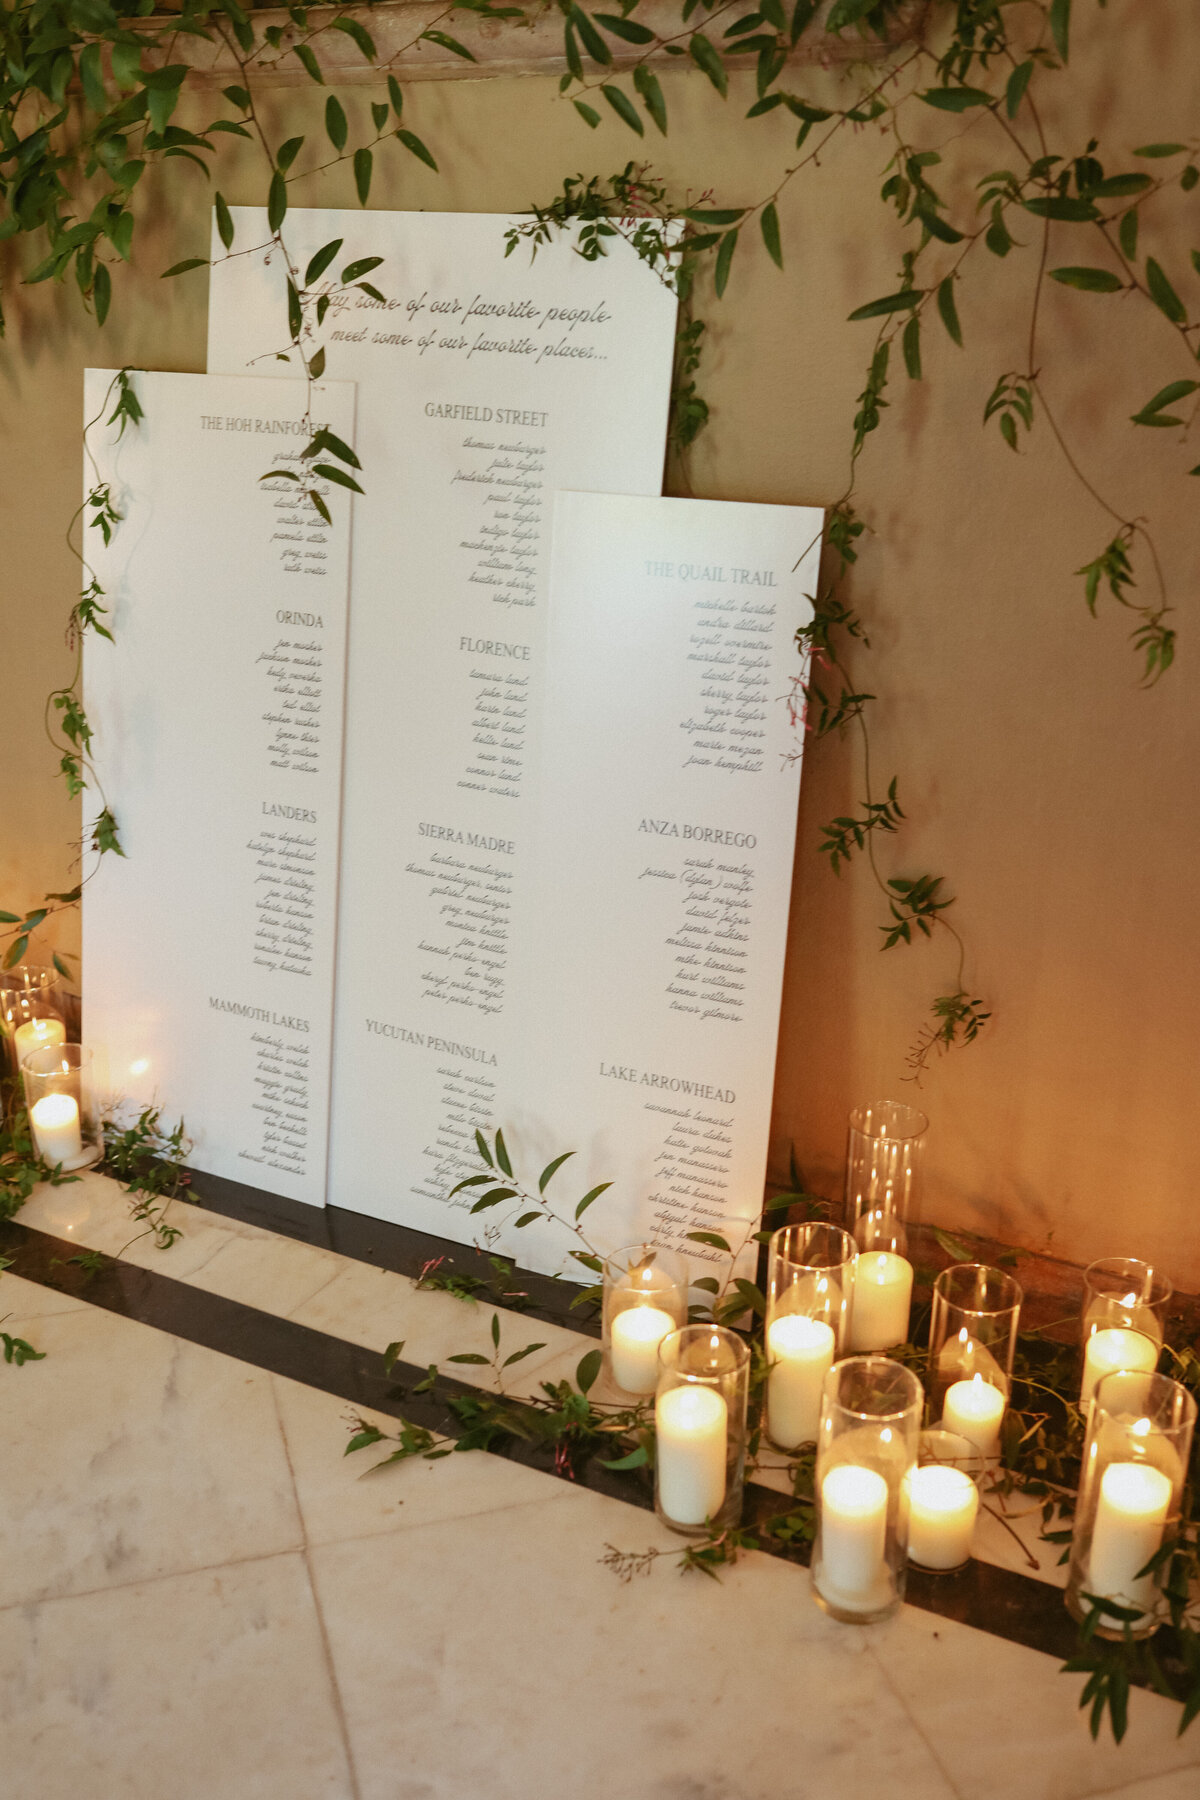 seating chart leaning against wall with vines all around it and large white candles in glass holders all around